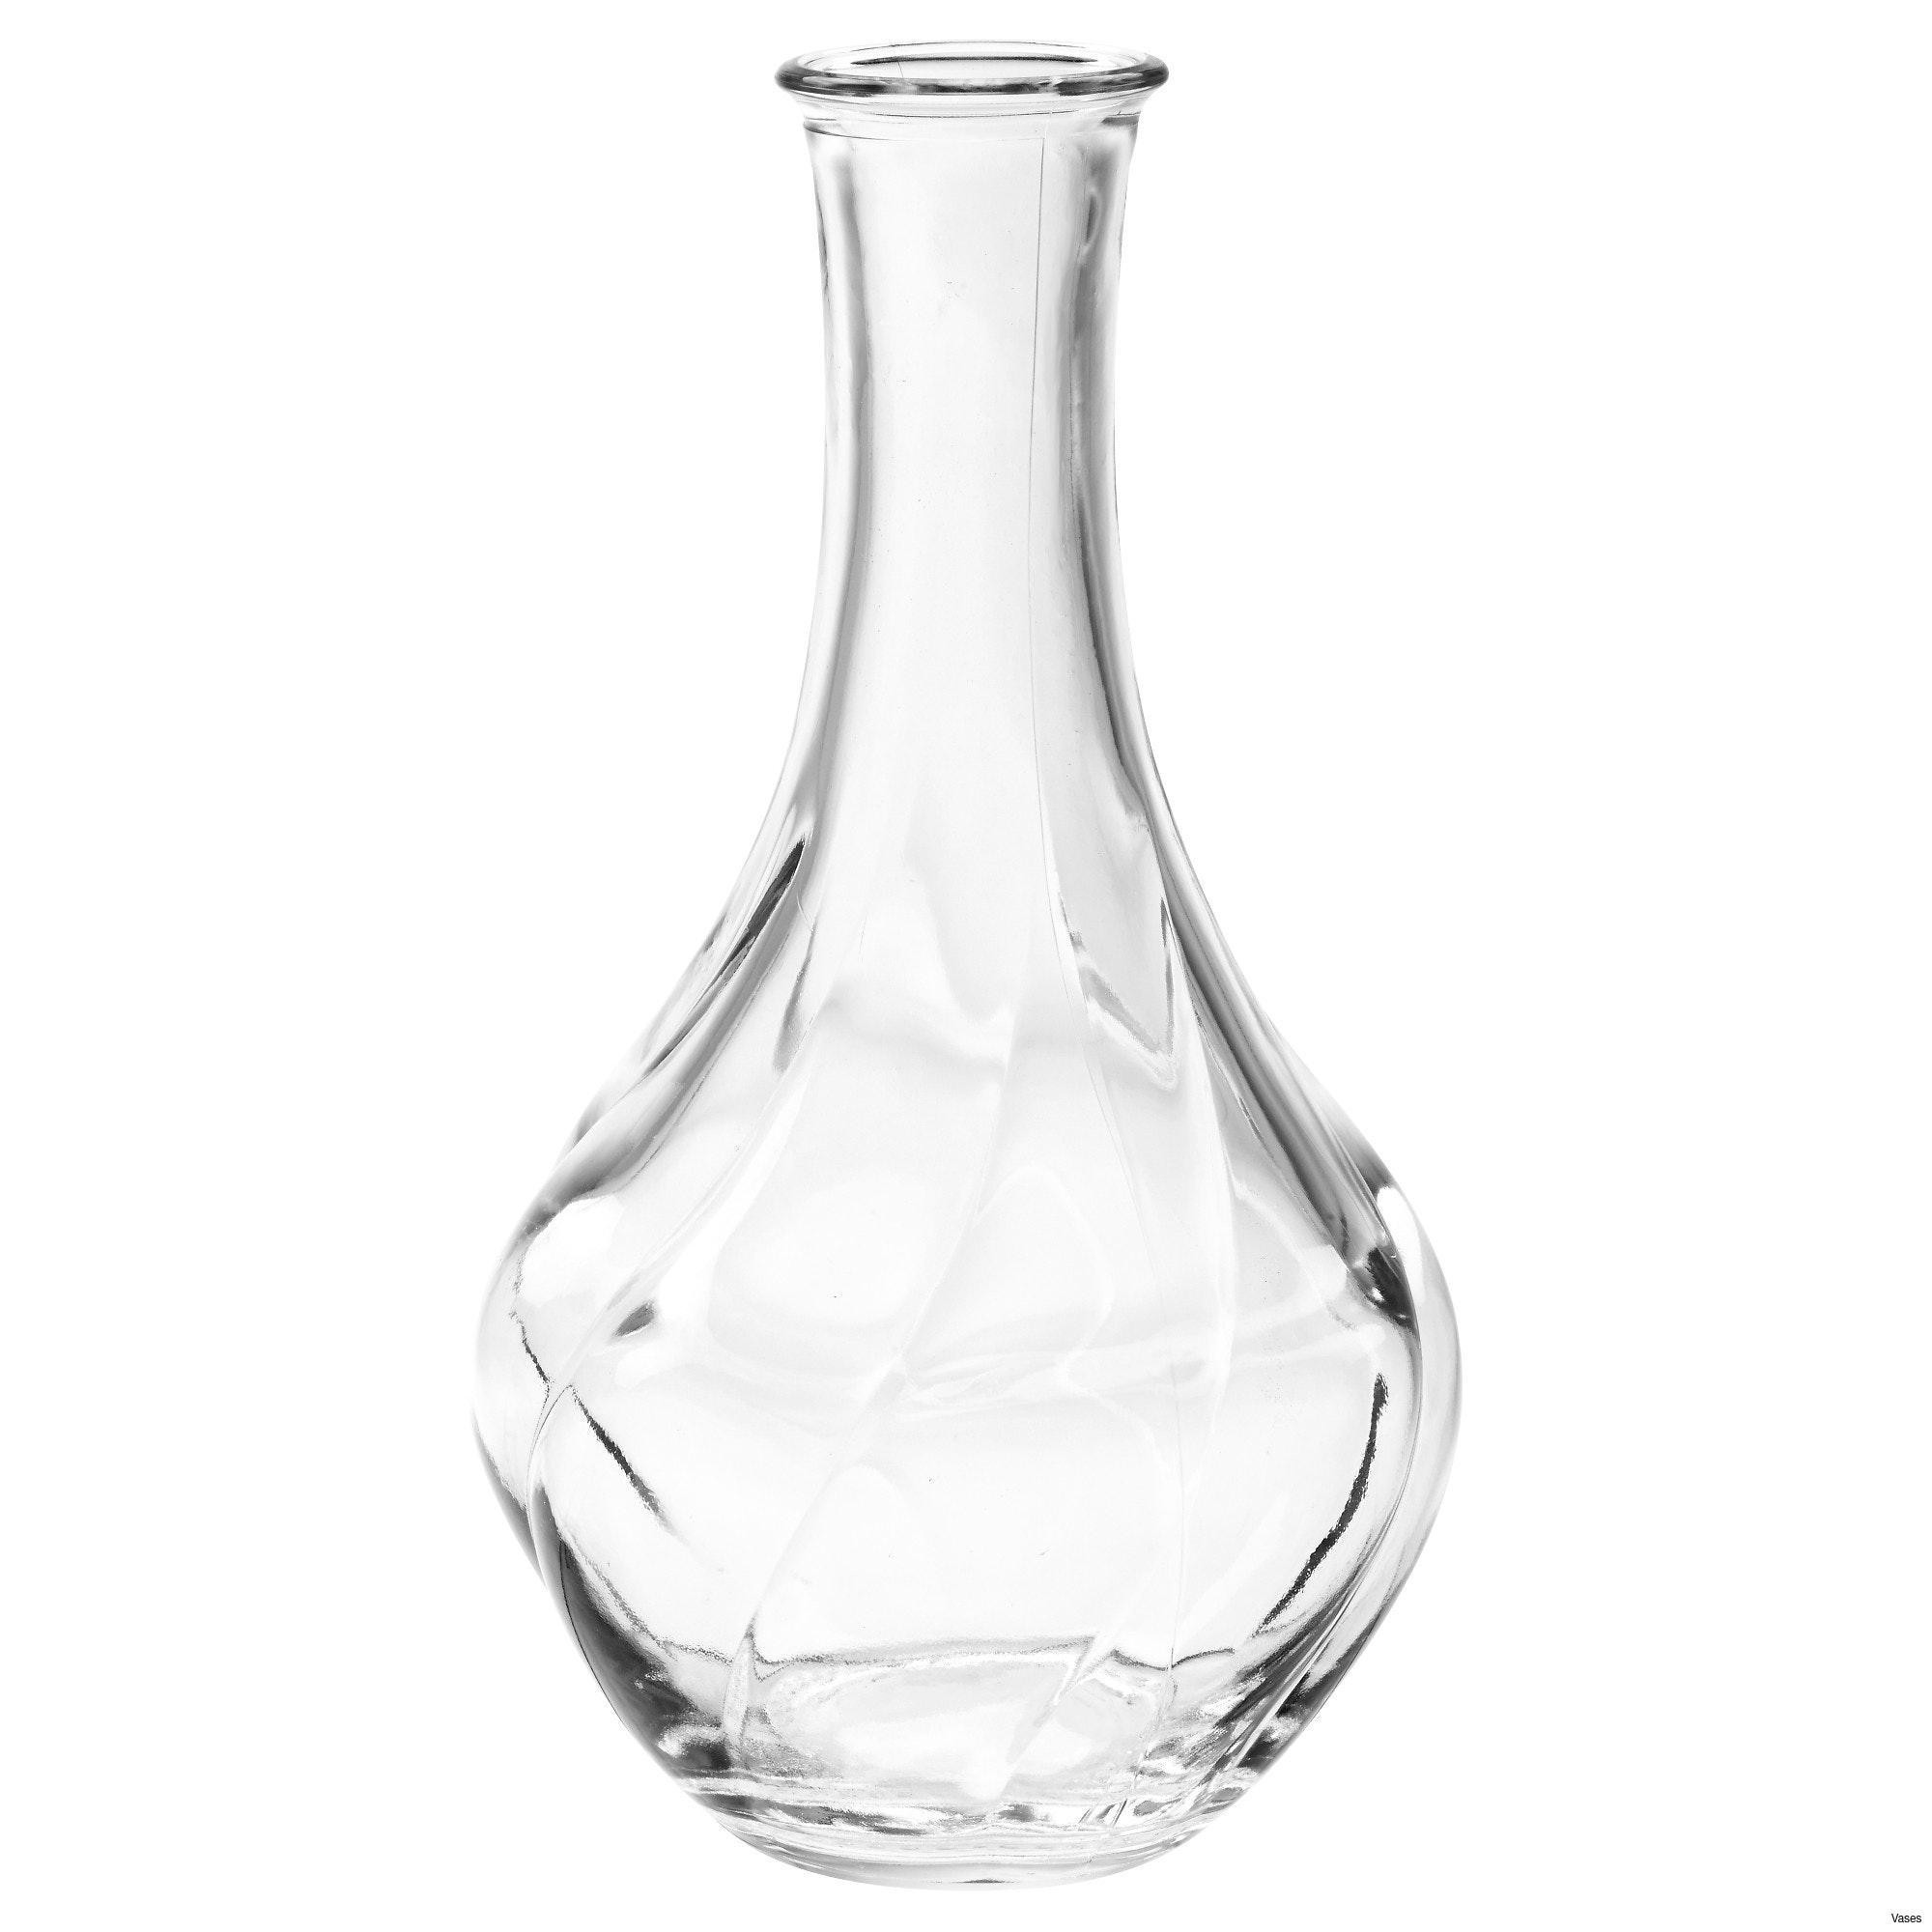 27 Best Large Ceramic Vase 2024 free download large ceramic vase of large white vases photos living room glass vases fresh clear vase 0d pertaining to large white vases photos living room glass vases fresh clear vase 0d tags amazing and